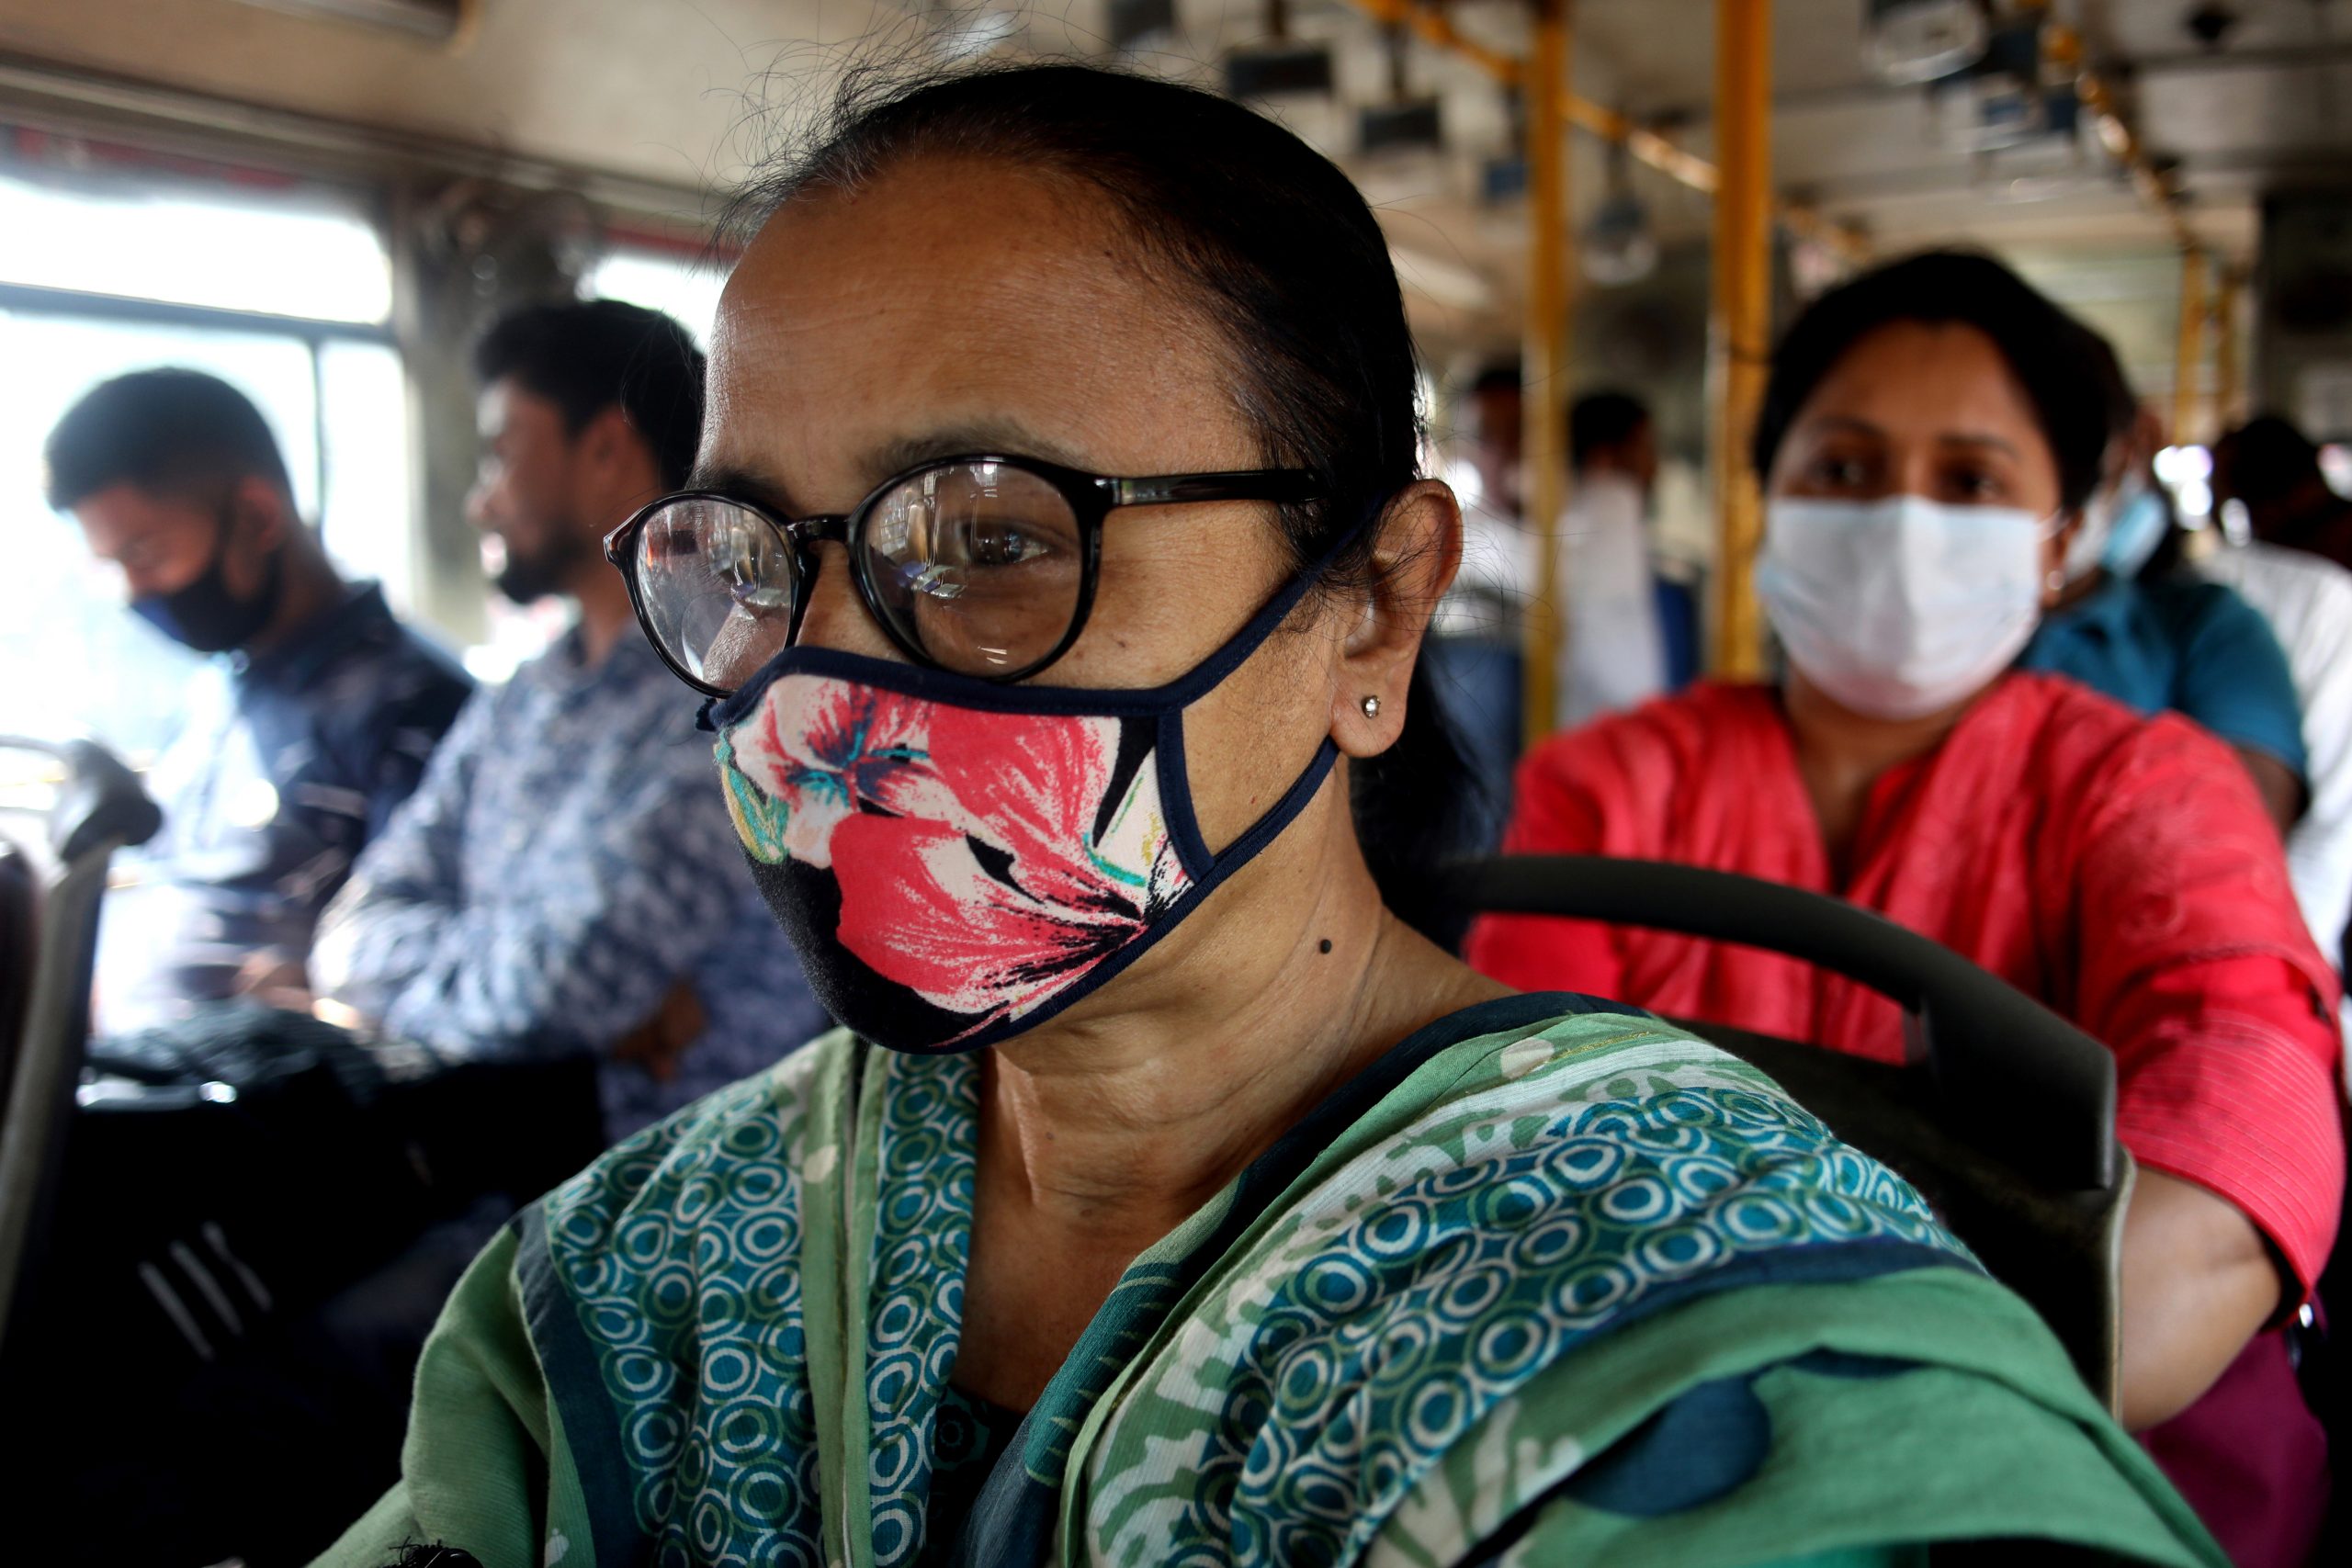 People wearing face masks are seen on a bus in Dhaka.